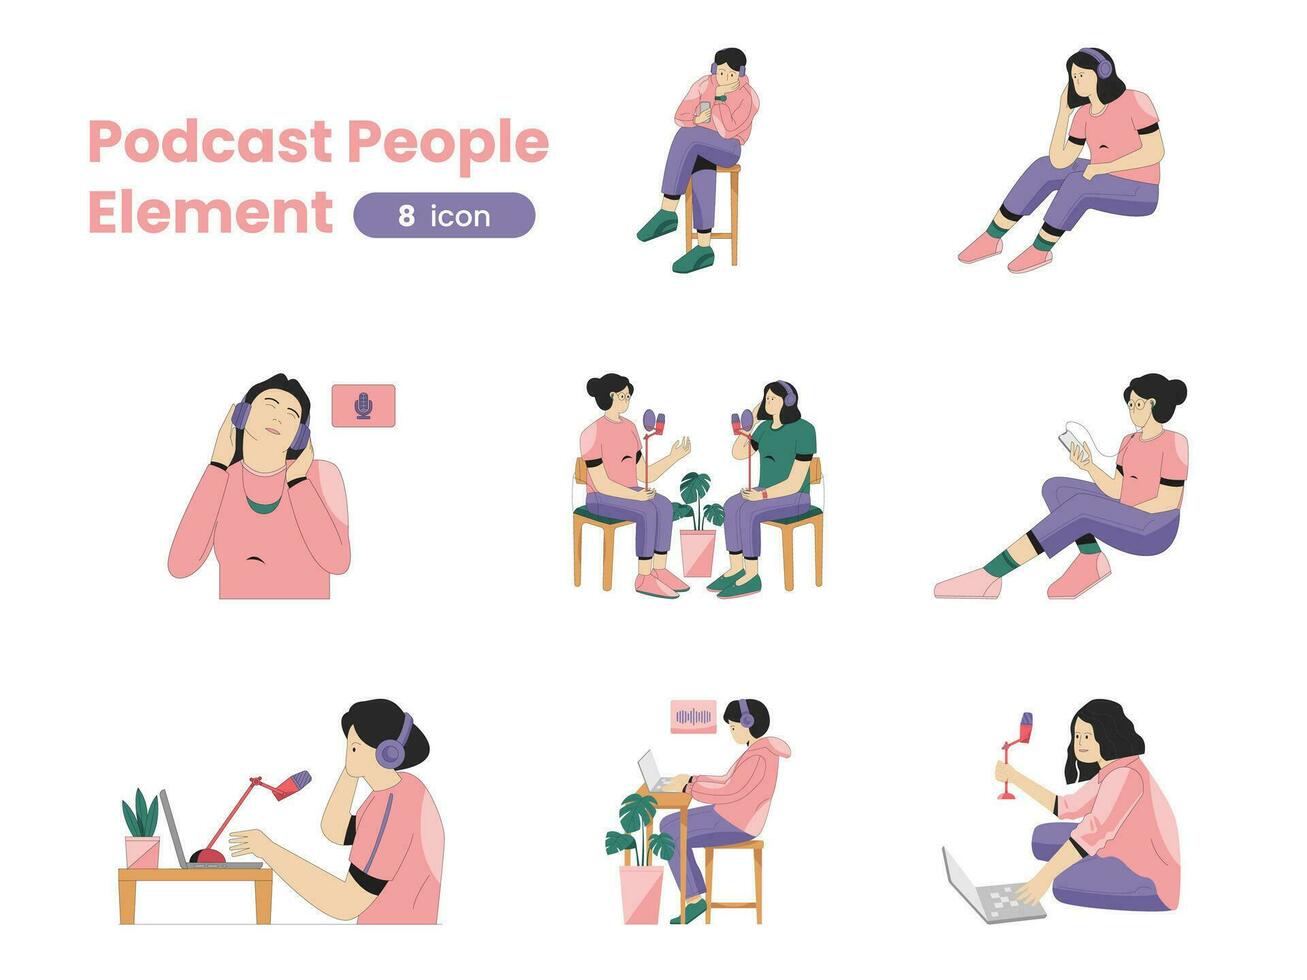 Podcast People Element vector